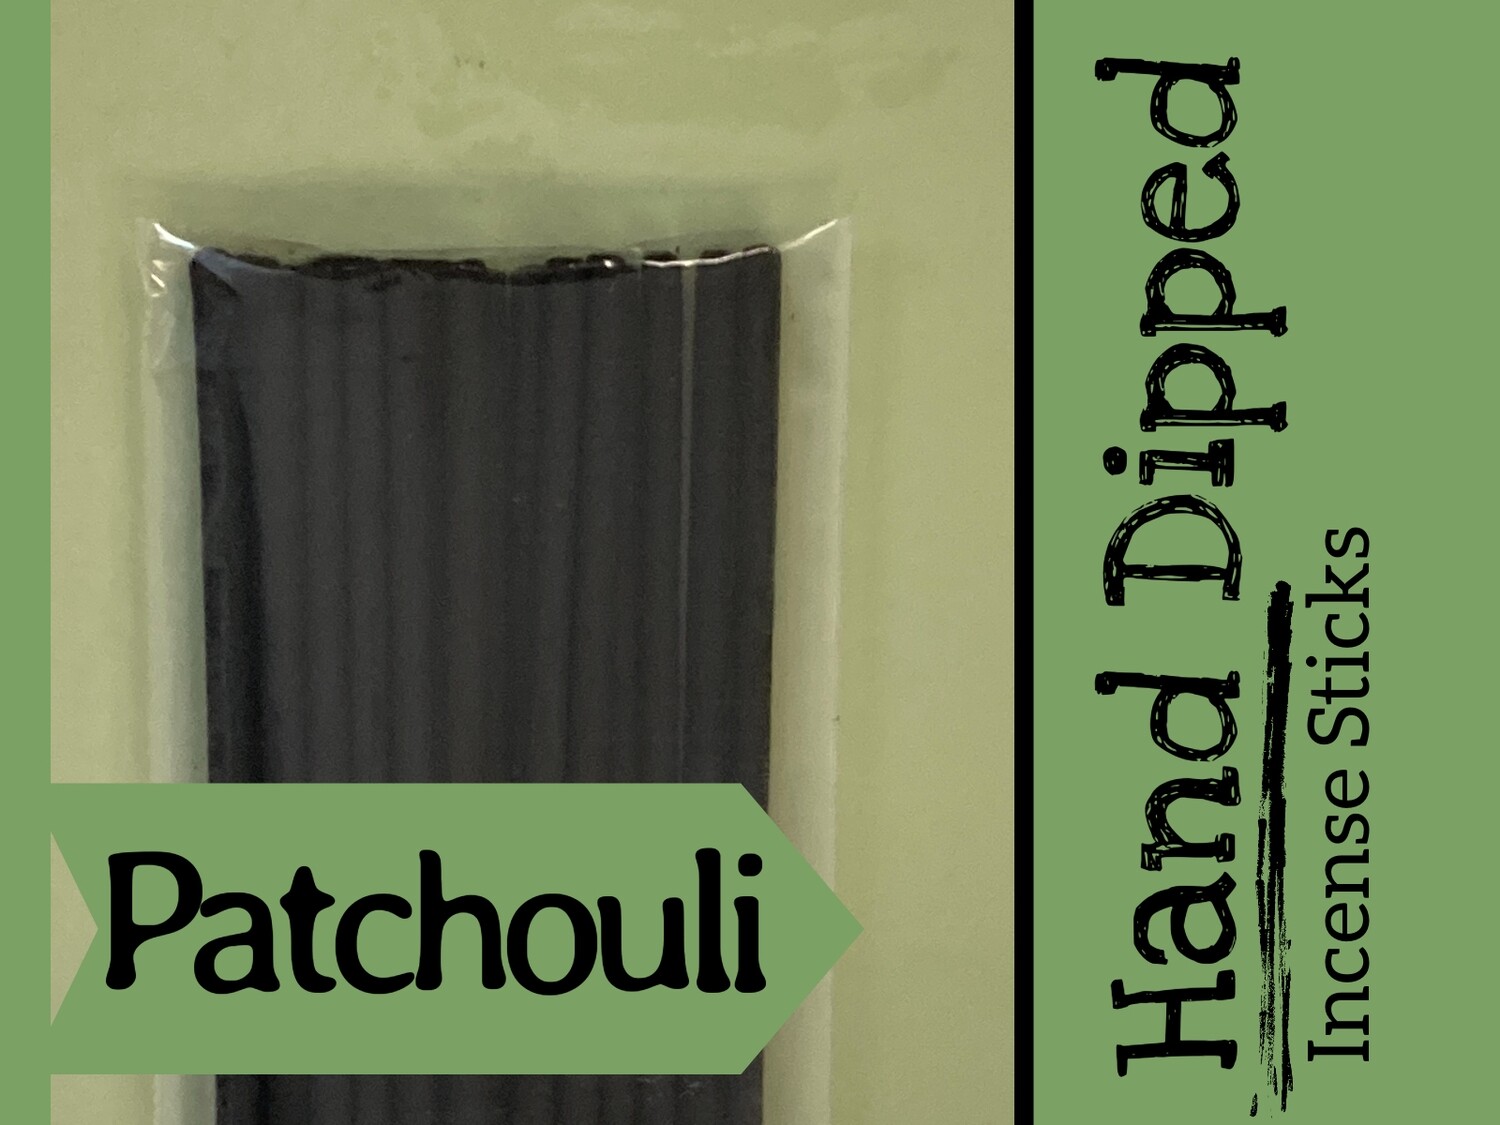 Patchouli - Hand dipped incense